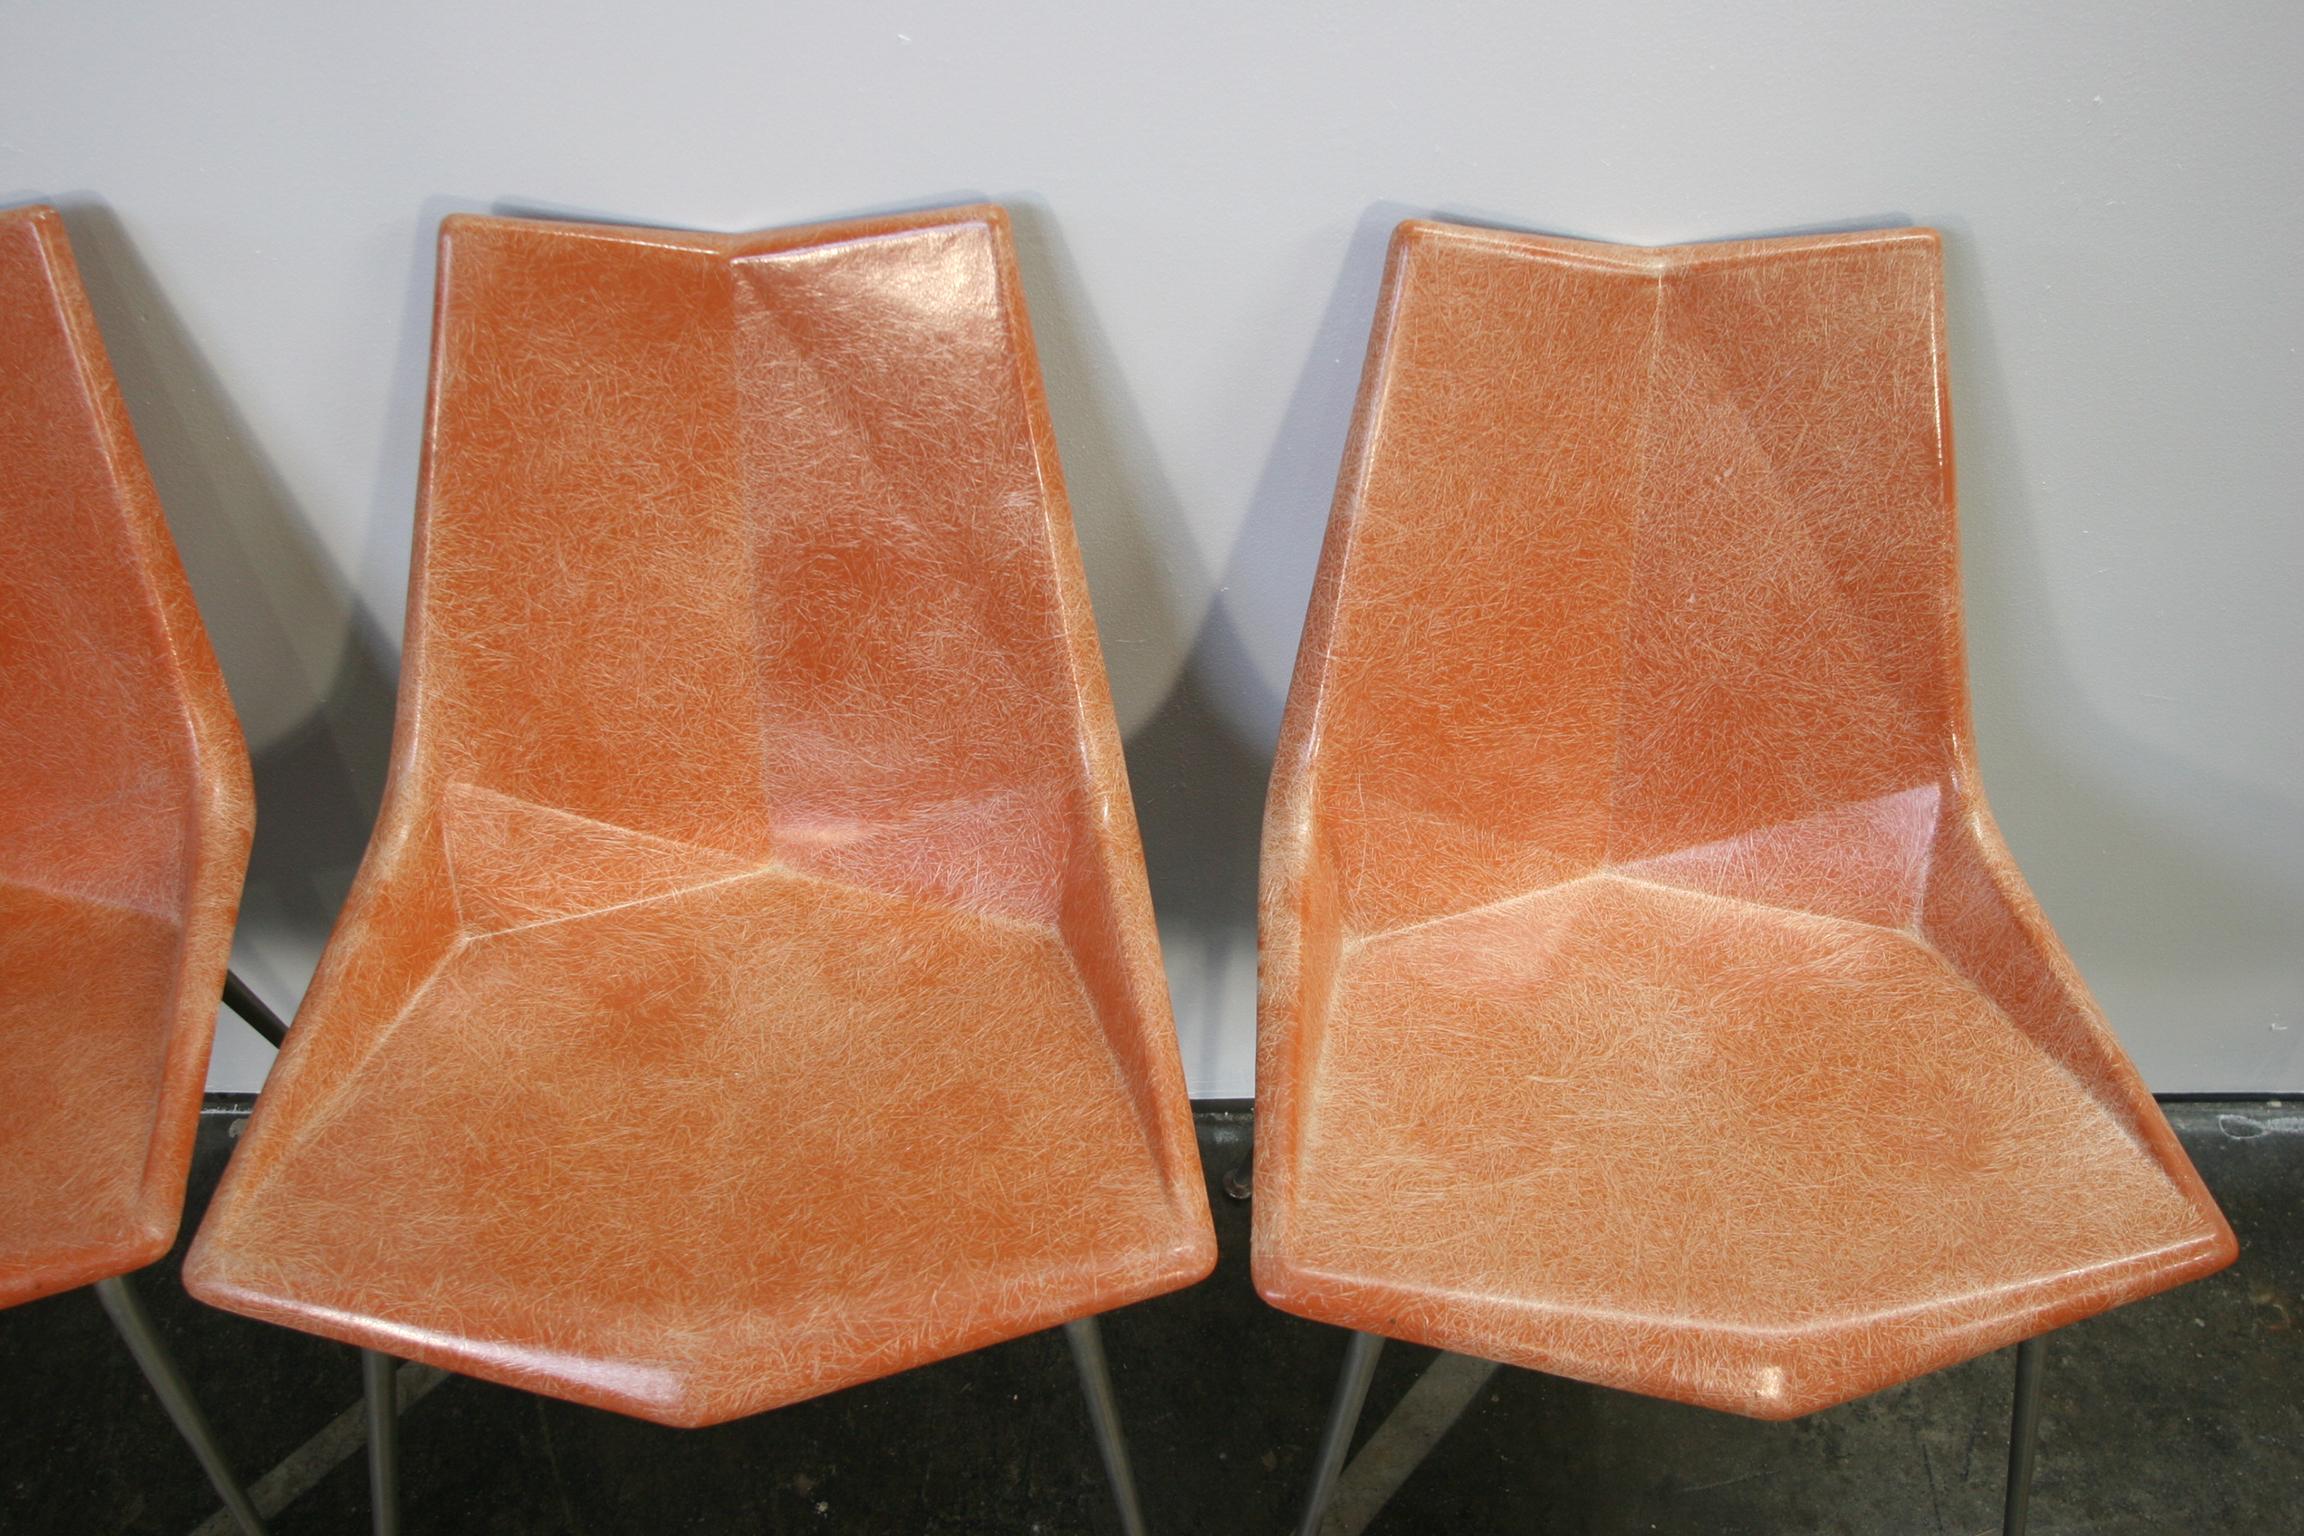 Set of four original midcentury orange Paul McCobb origami fiberglass with reinforced plastic has brushed steel bases. All four of these side chairs are marked Paul McCobb by St. John Seating Corp. New York. Very rare set.